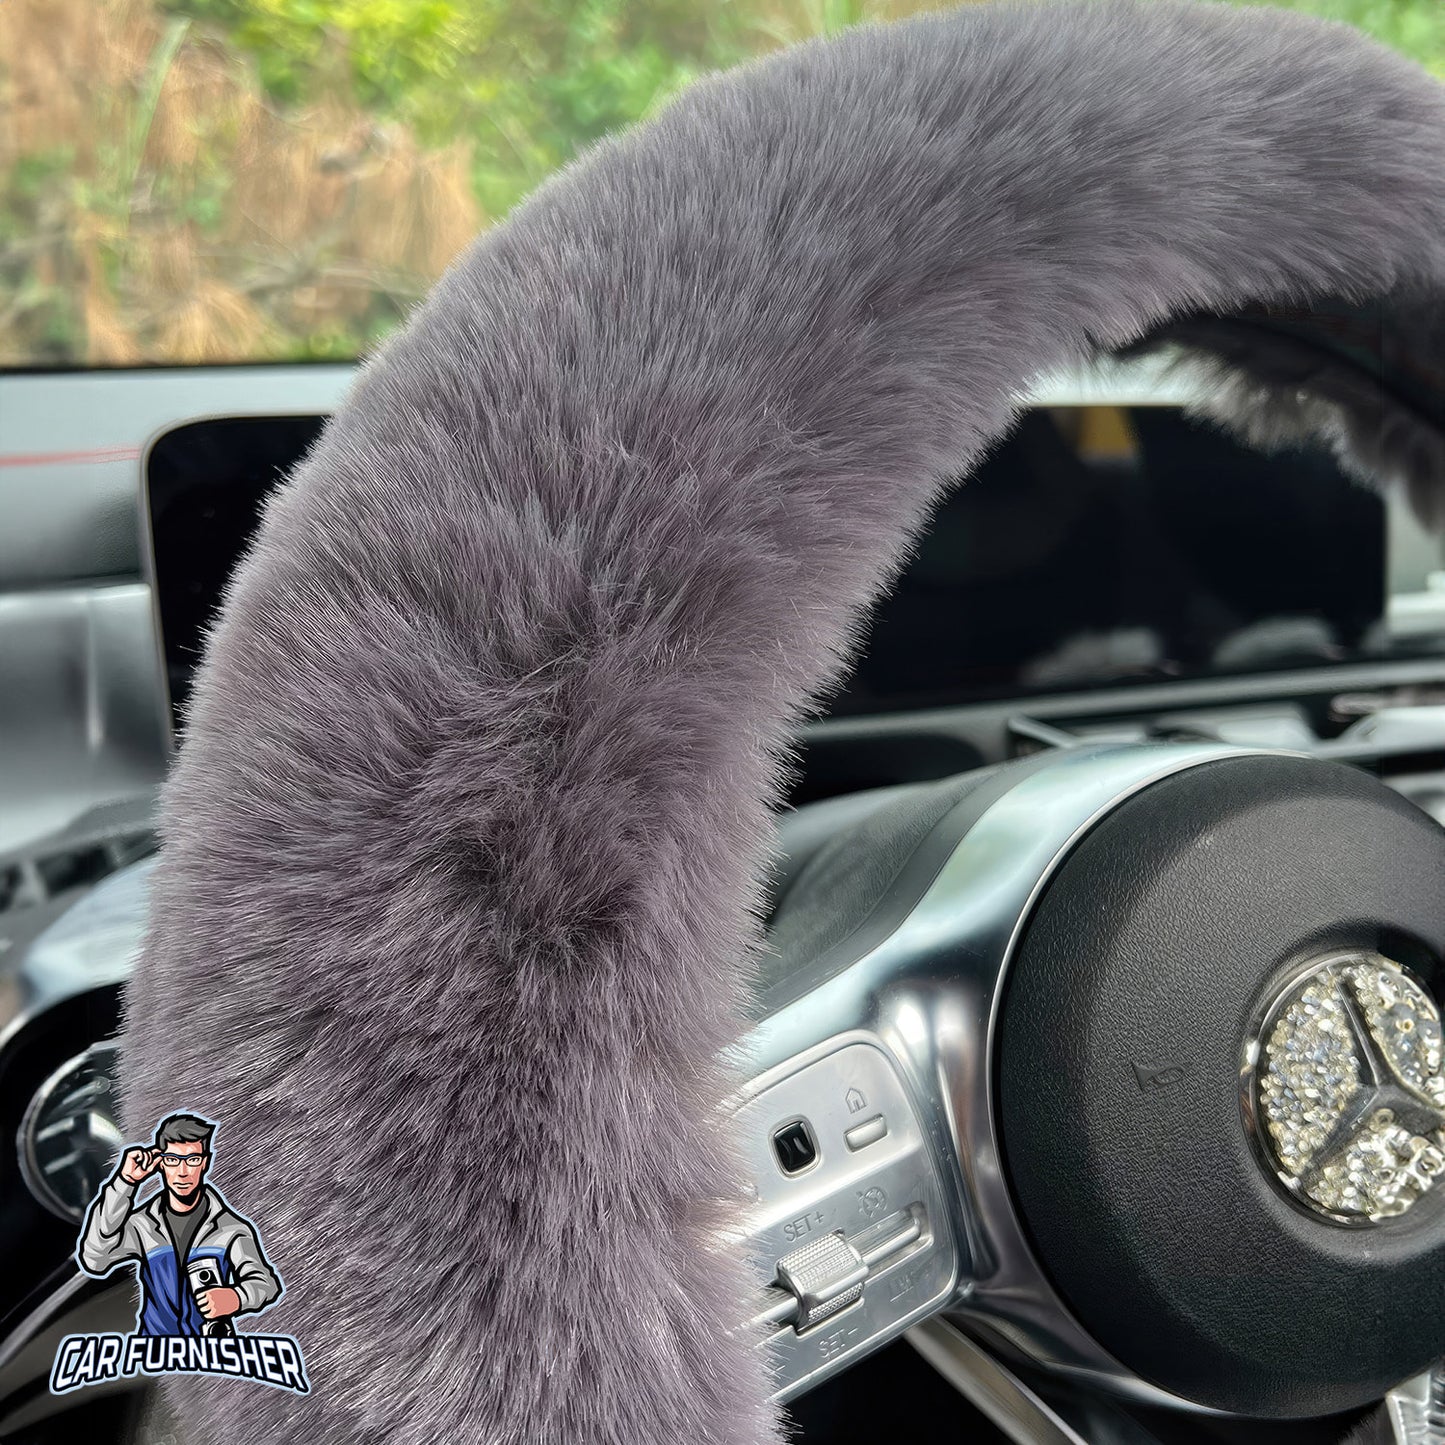 Fluffy Plush Steering Wheel Cover | Extra Soft Smoked Black Fabric